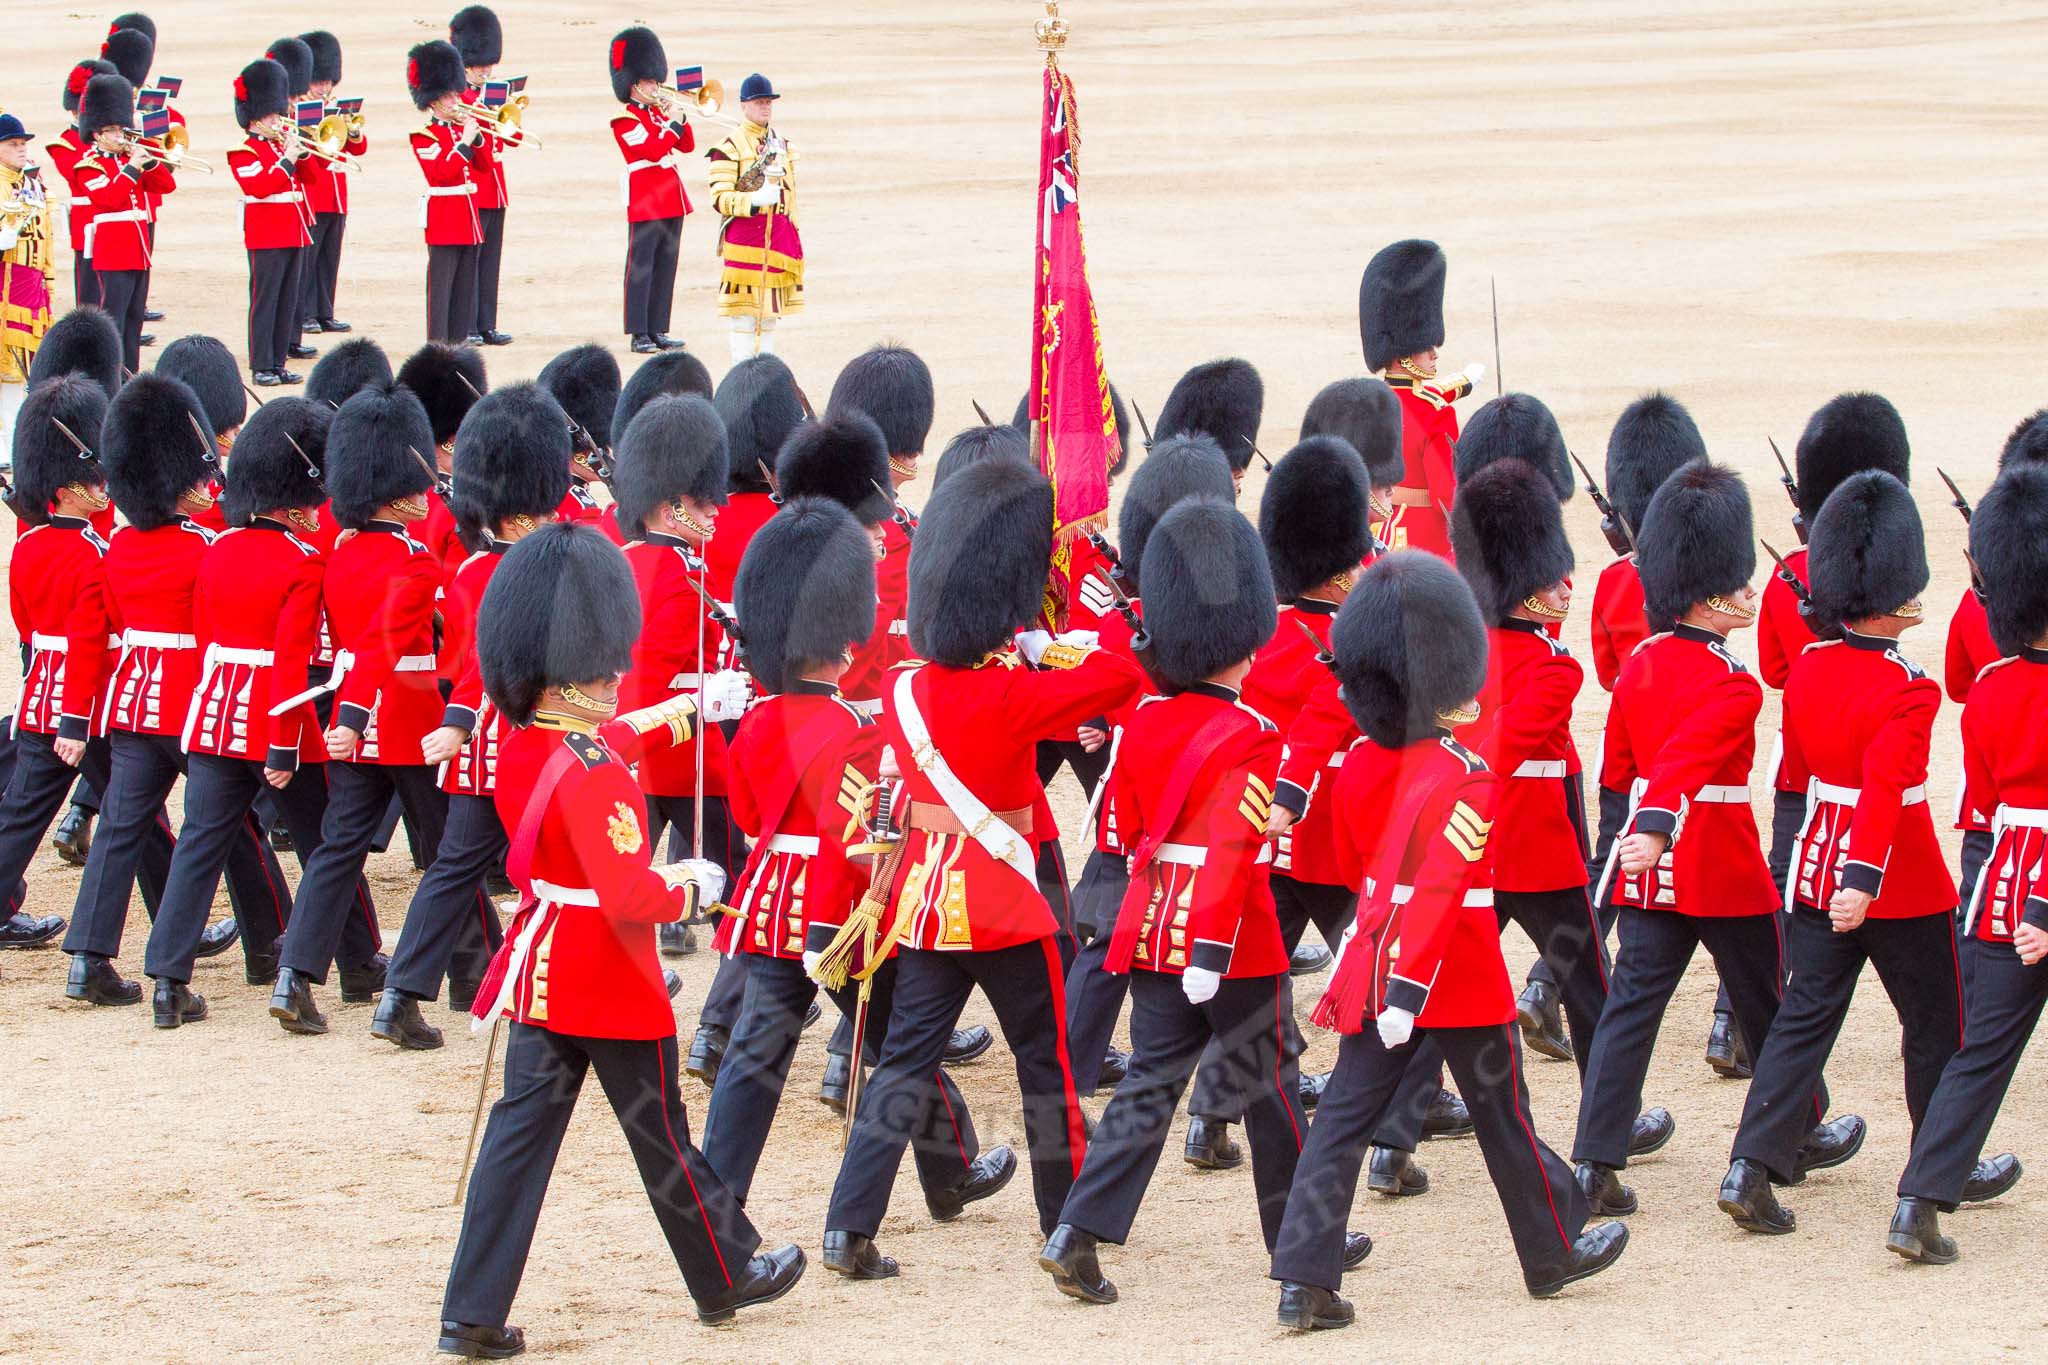 Trooping the Colour 2014.
Horse Guards Parade, Westminster,
London SW1A,

United Kingdom,
on 14 June 2014 at 11:47, image #690